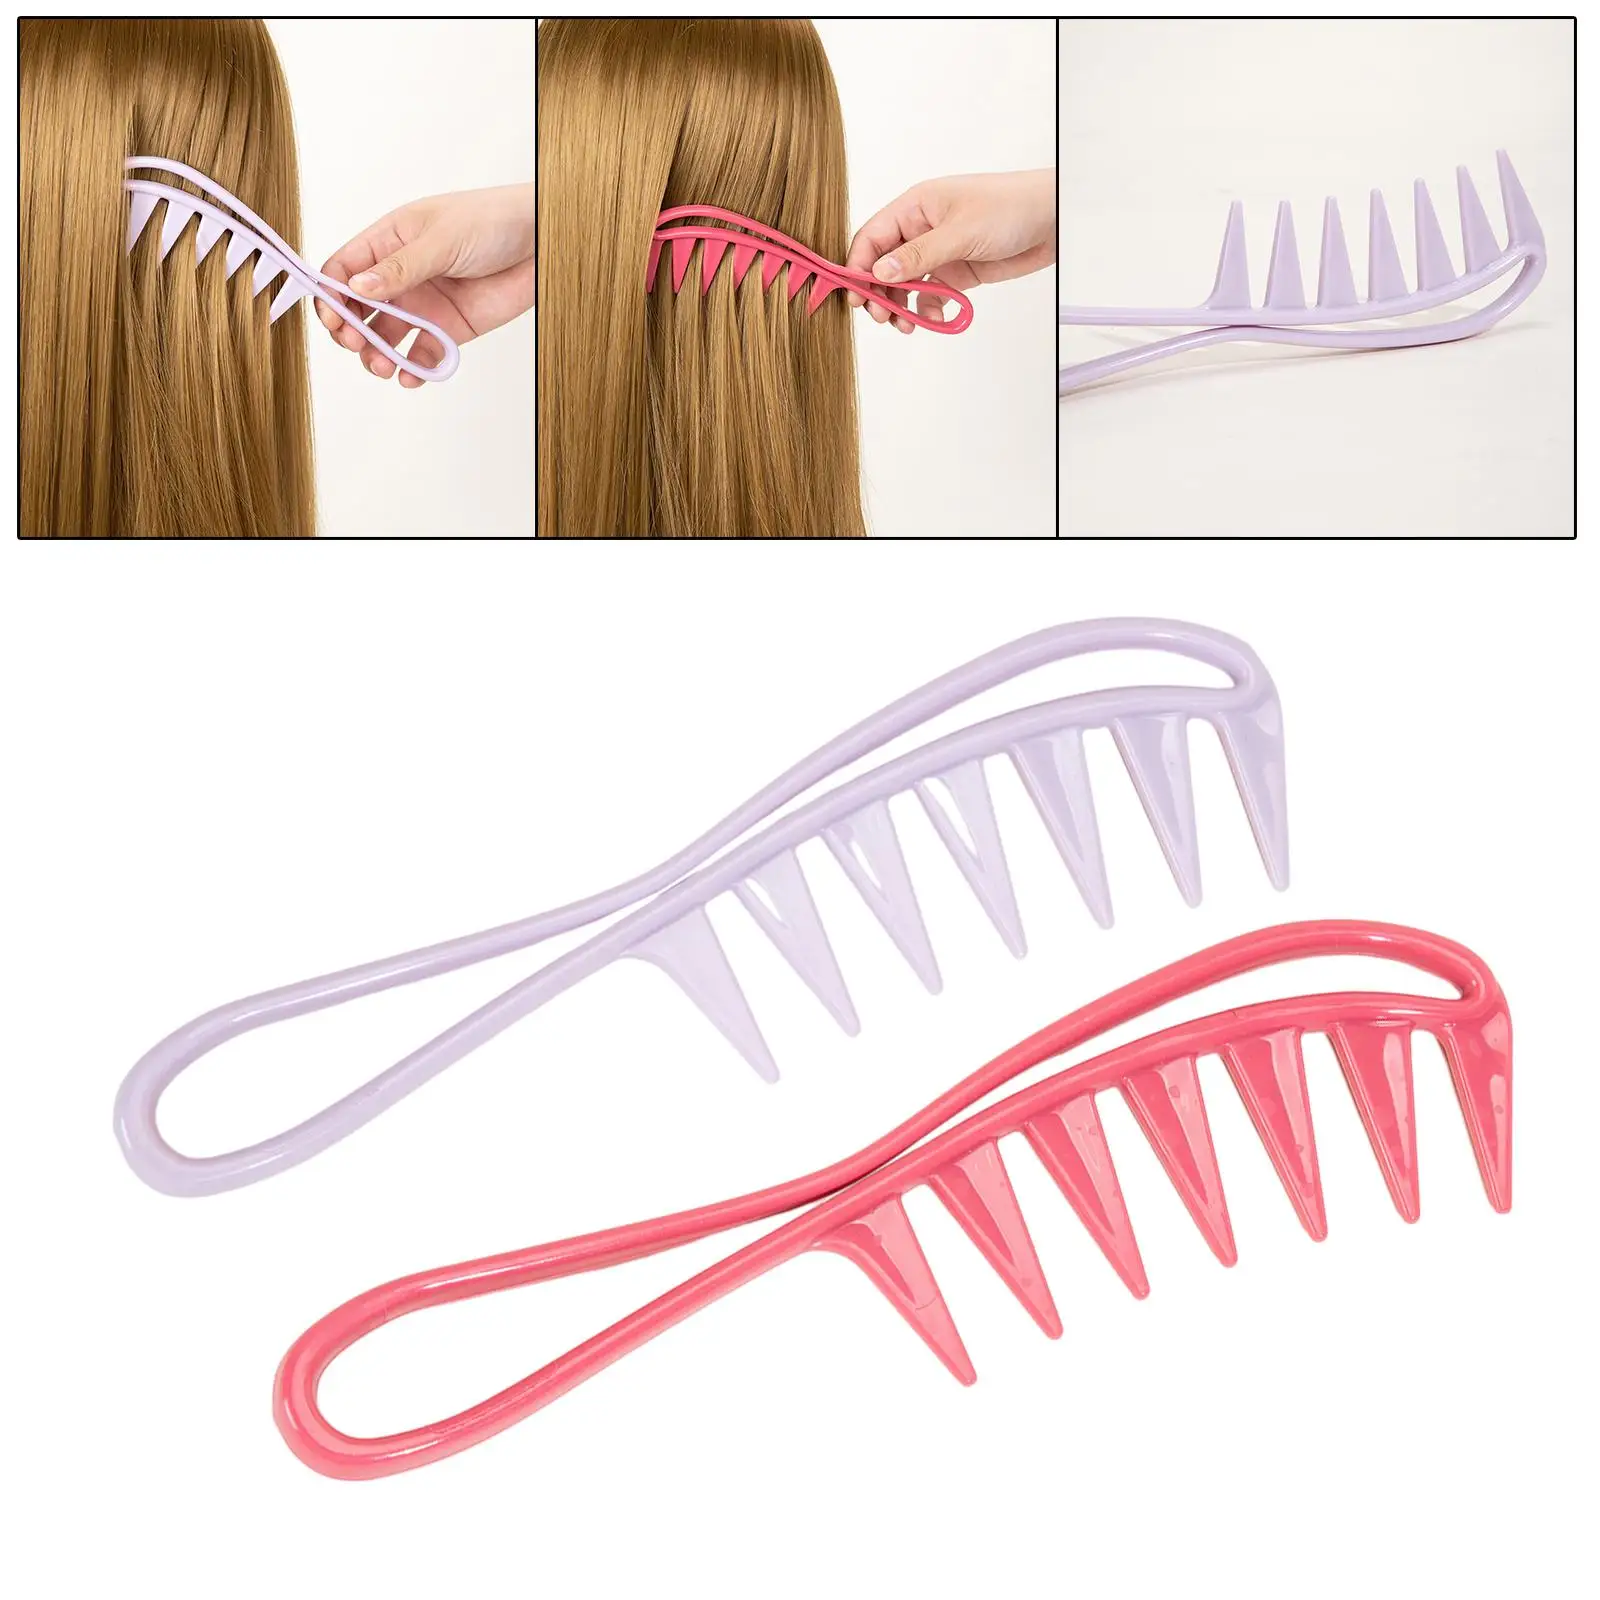 Wide Tooth Comb Mini Hairstyle Tool Professional Barber Accessories Hair Brush for Barber Salon Detangles Wet or Dry Hair